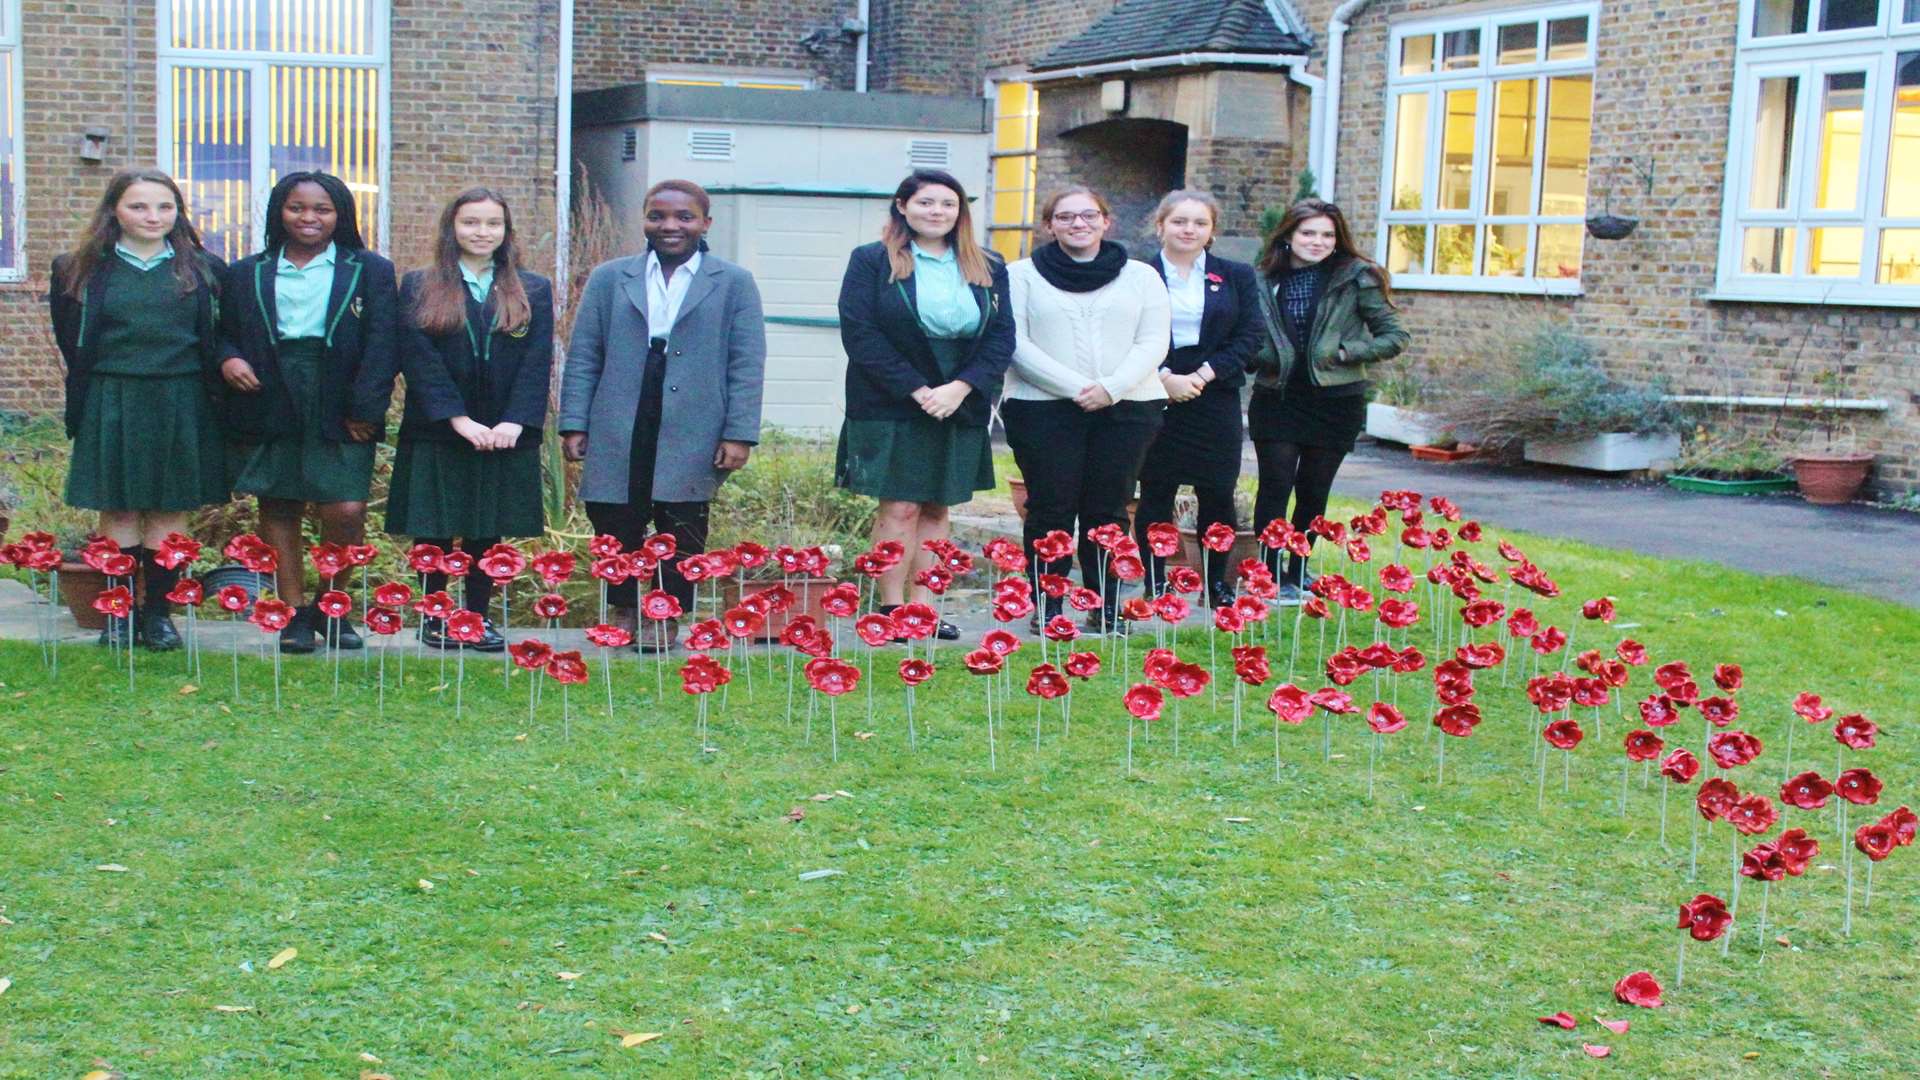 Ruby Taylor, Eseohe Lawrence-Orumwense, Moyra Donnelly, Eliza Sapara-Grant, Alana Cowdery-Brewster, Katie-Ann Hill, Kitty Tucker and Willow Wilkins in front of Dartford Grammar School for Girl's display of ceramic poppies.